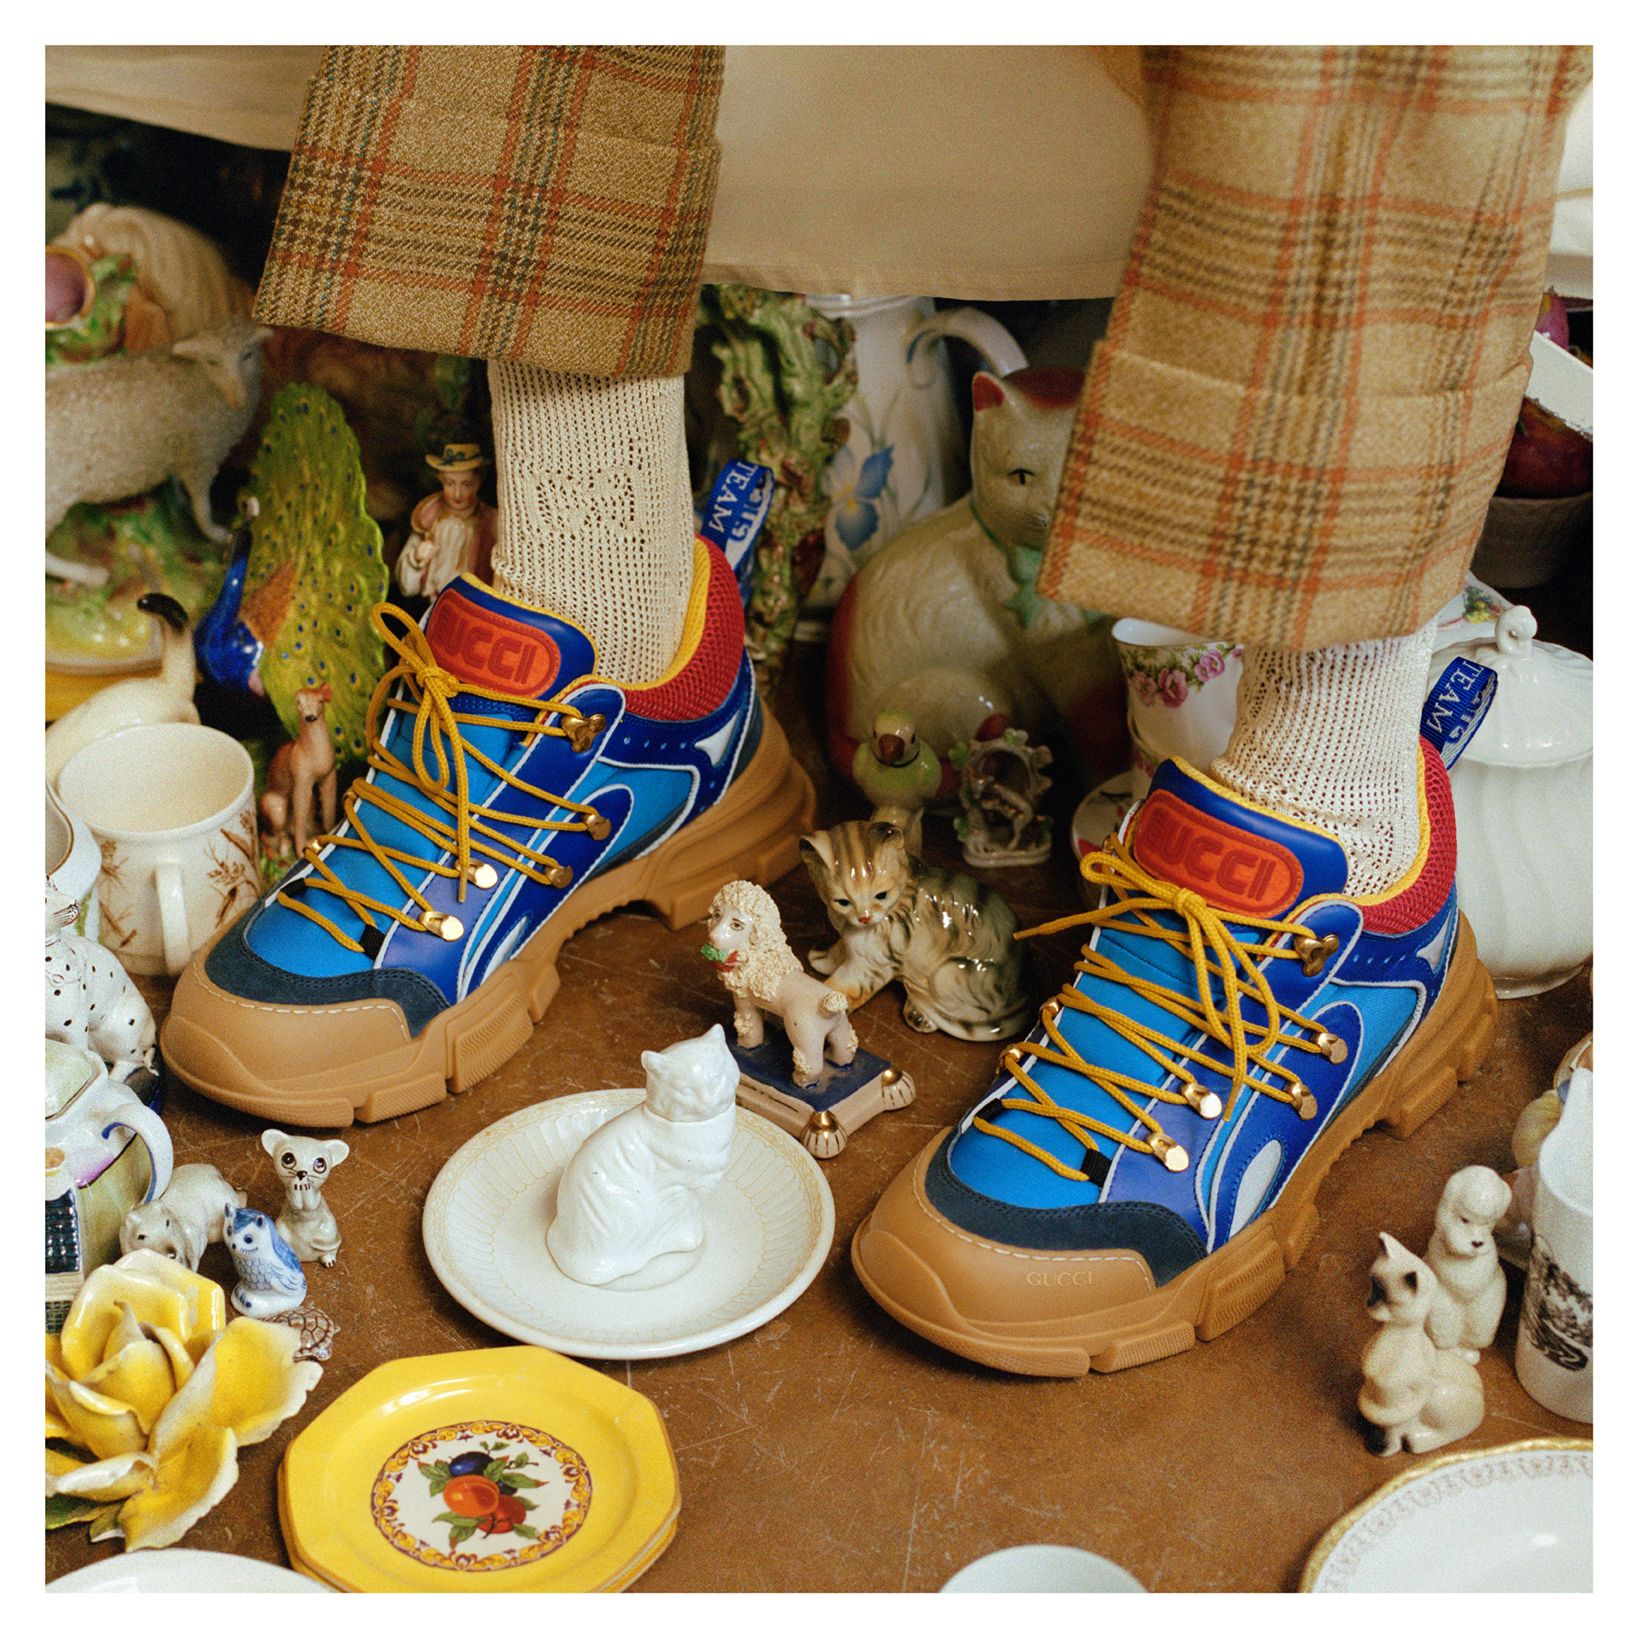 gucci on Twitter: "In blue leather with rubber soles, the #GucciFlashtrek sneaker from #GucciFW18 by #AlessandroMichele. GUCCI / https://t.co/ZxL6UgUrn8" / X